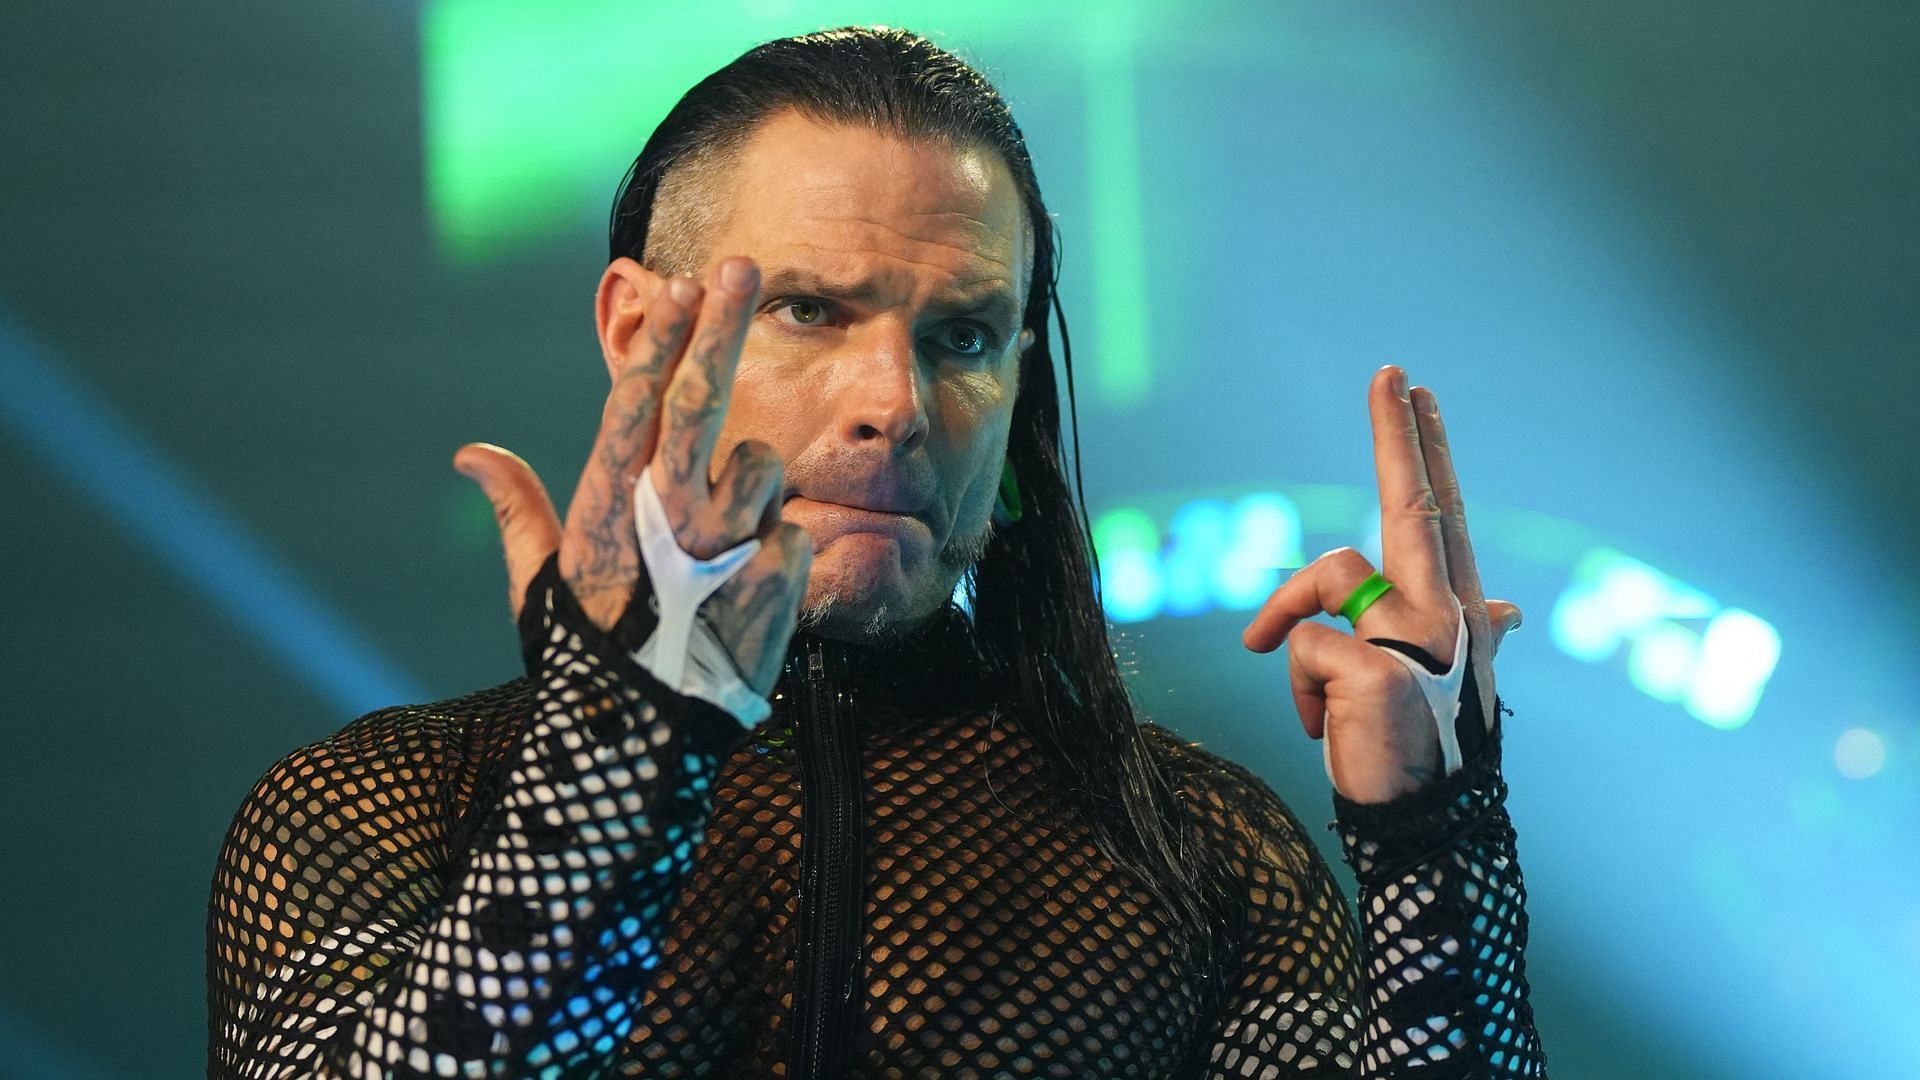 Jeff Hardy is still absent from AEW TV (image credit: All Elite Wrestling)